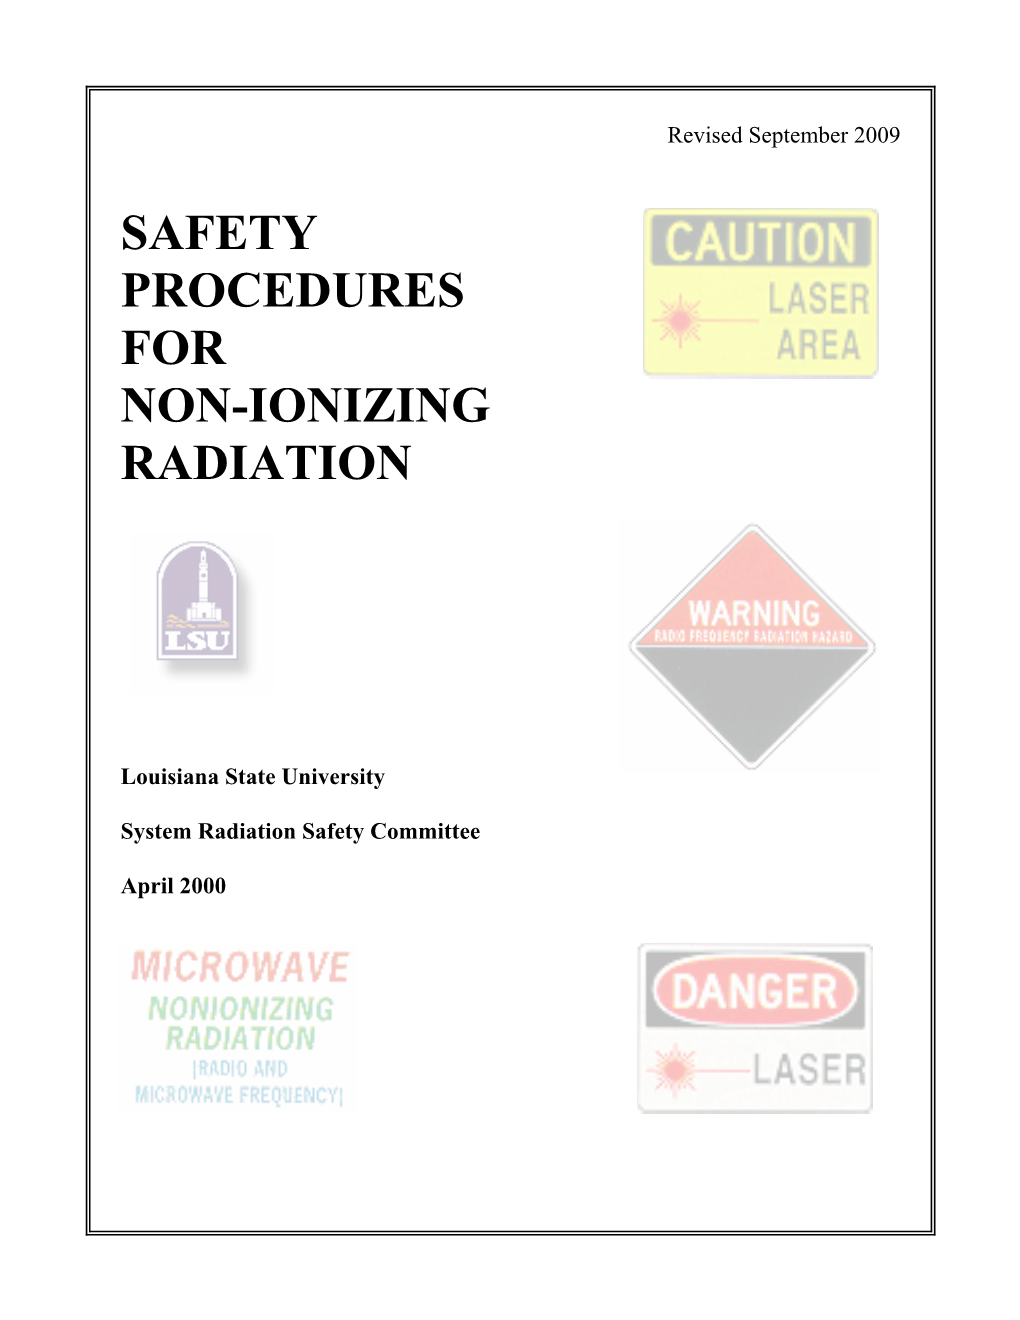 4. Safety Procedures for Non-Ionizing Radiation